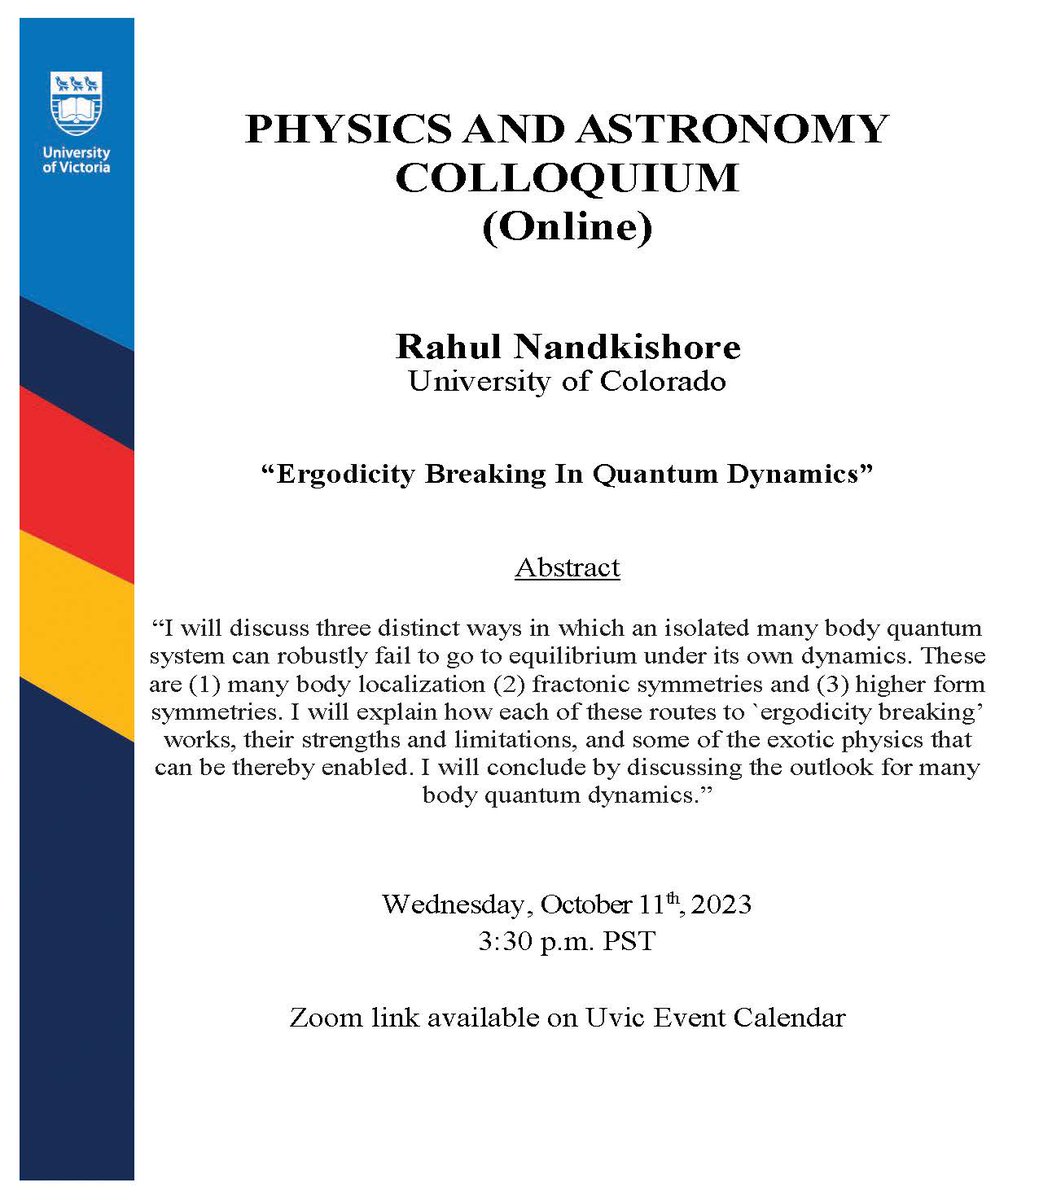 COLLOQUIUM(Online): Dr. Rahul Nandkishore, University of Colorado, will give an online colloquium on Wednesday October 11th at 3:30 PST. For more information: events.uvic.ca/physics/event/…